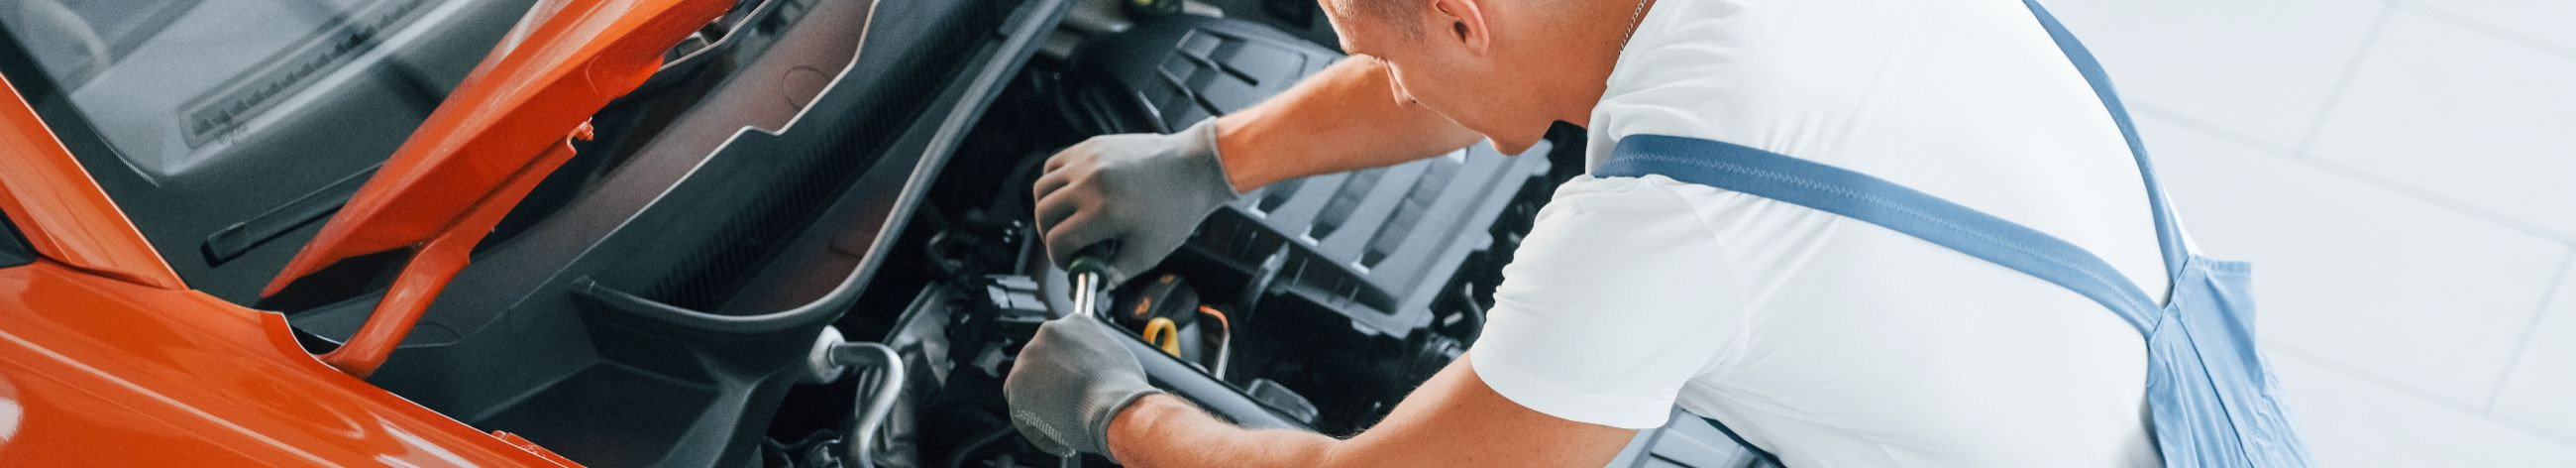 We offer comprehensive car repair and maintenance services, utilizing modern equipment and high-quality parts.